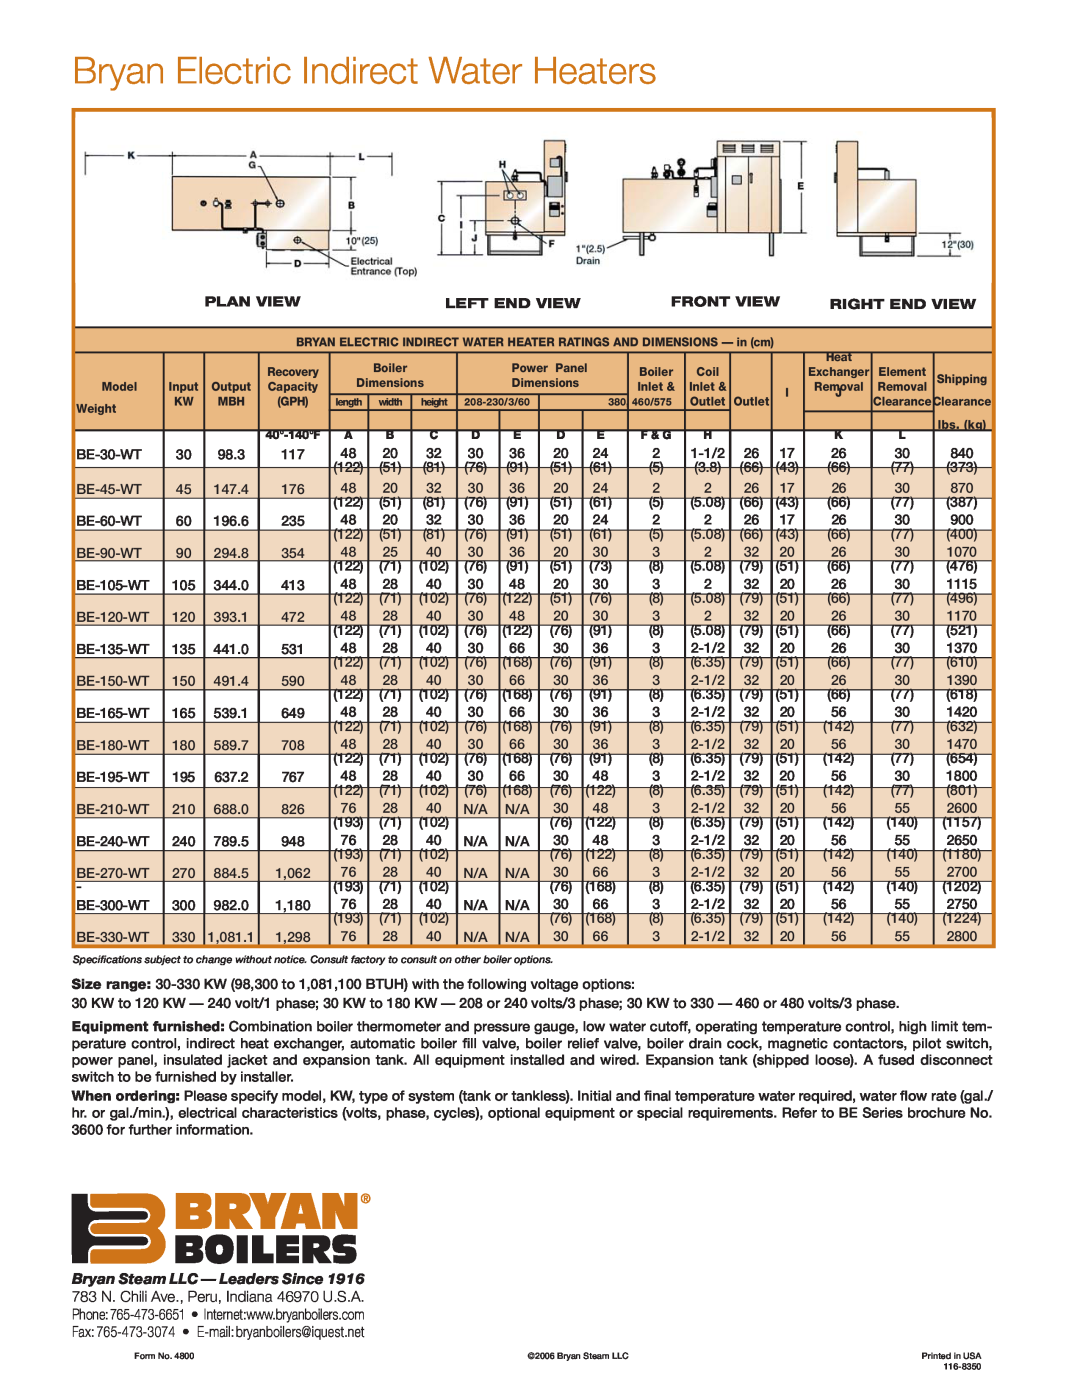 Bryan Boilers BE-210-WT4T7 Bryan Electric Indirect Water Heaters, Plan View, Left End View, Front View, Right End View 